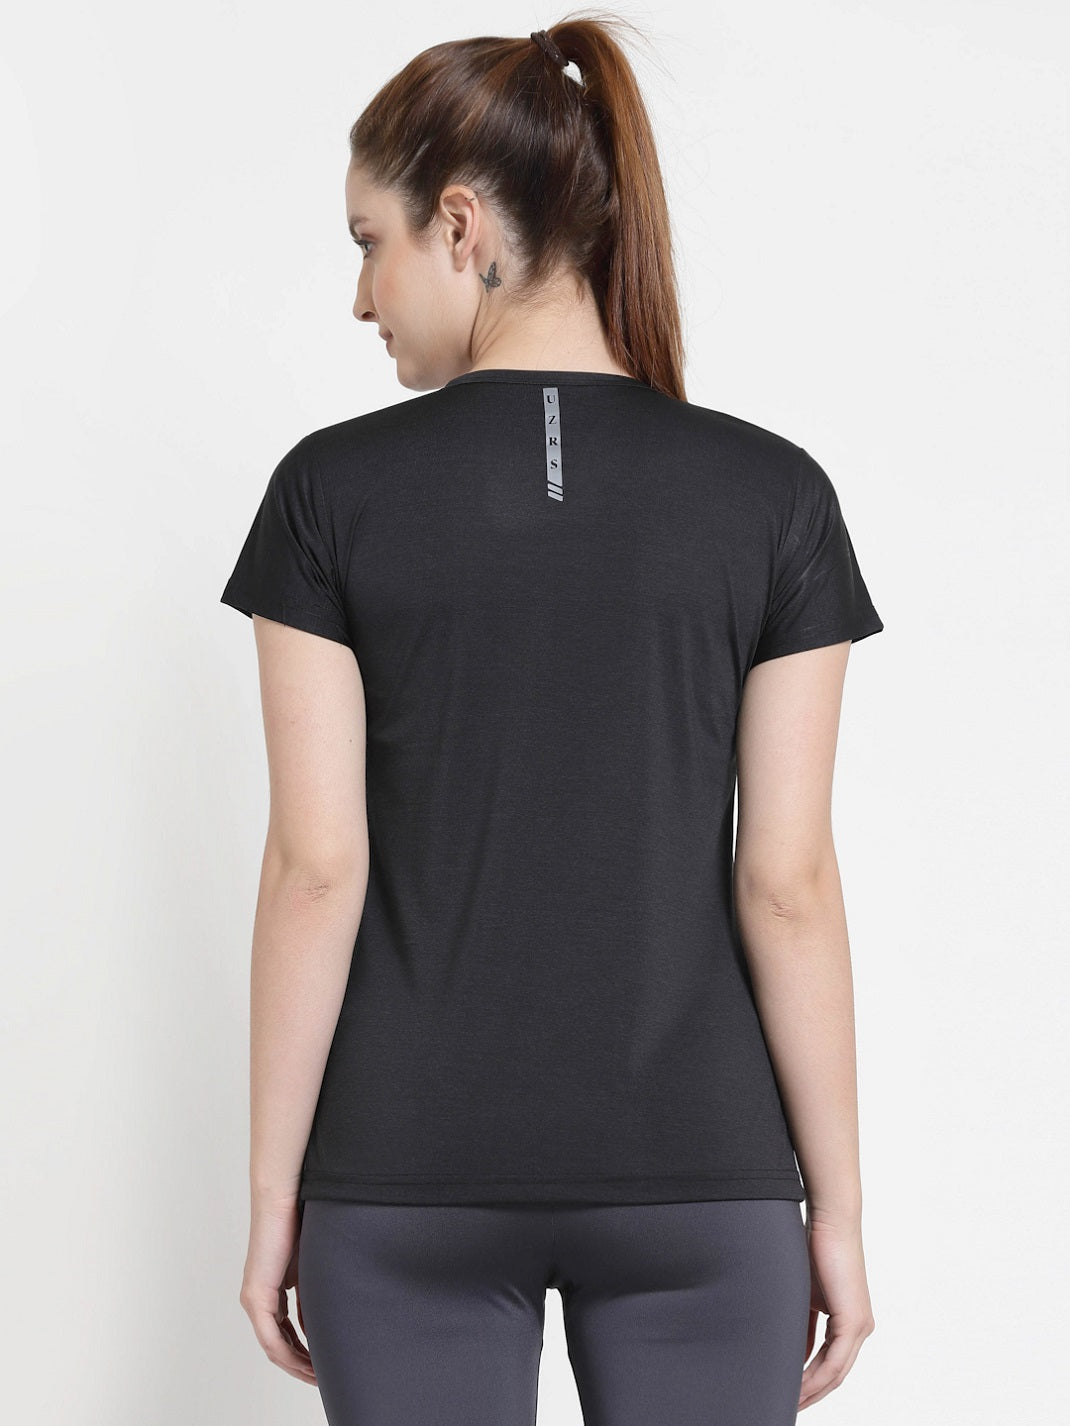 Women Penta Top T Shirt Stretchable Gym Wear at Rs 200/piece, Fitness, Gym  & Yoga Wear in Faridabad